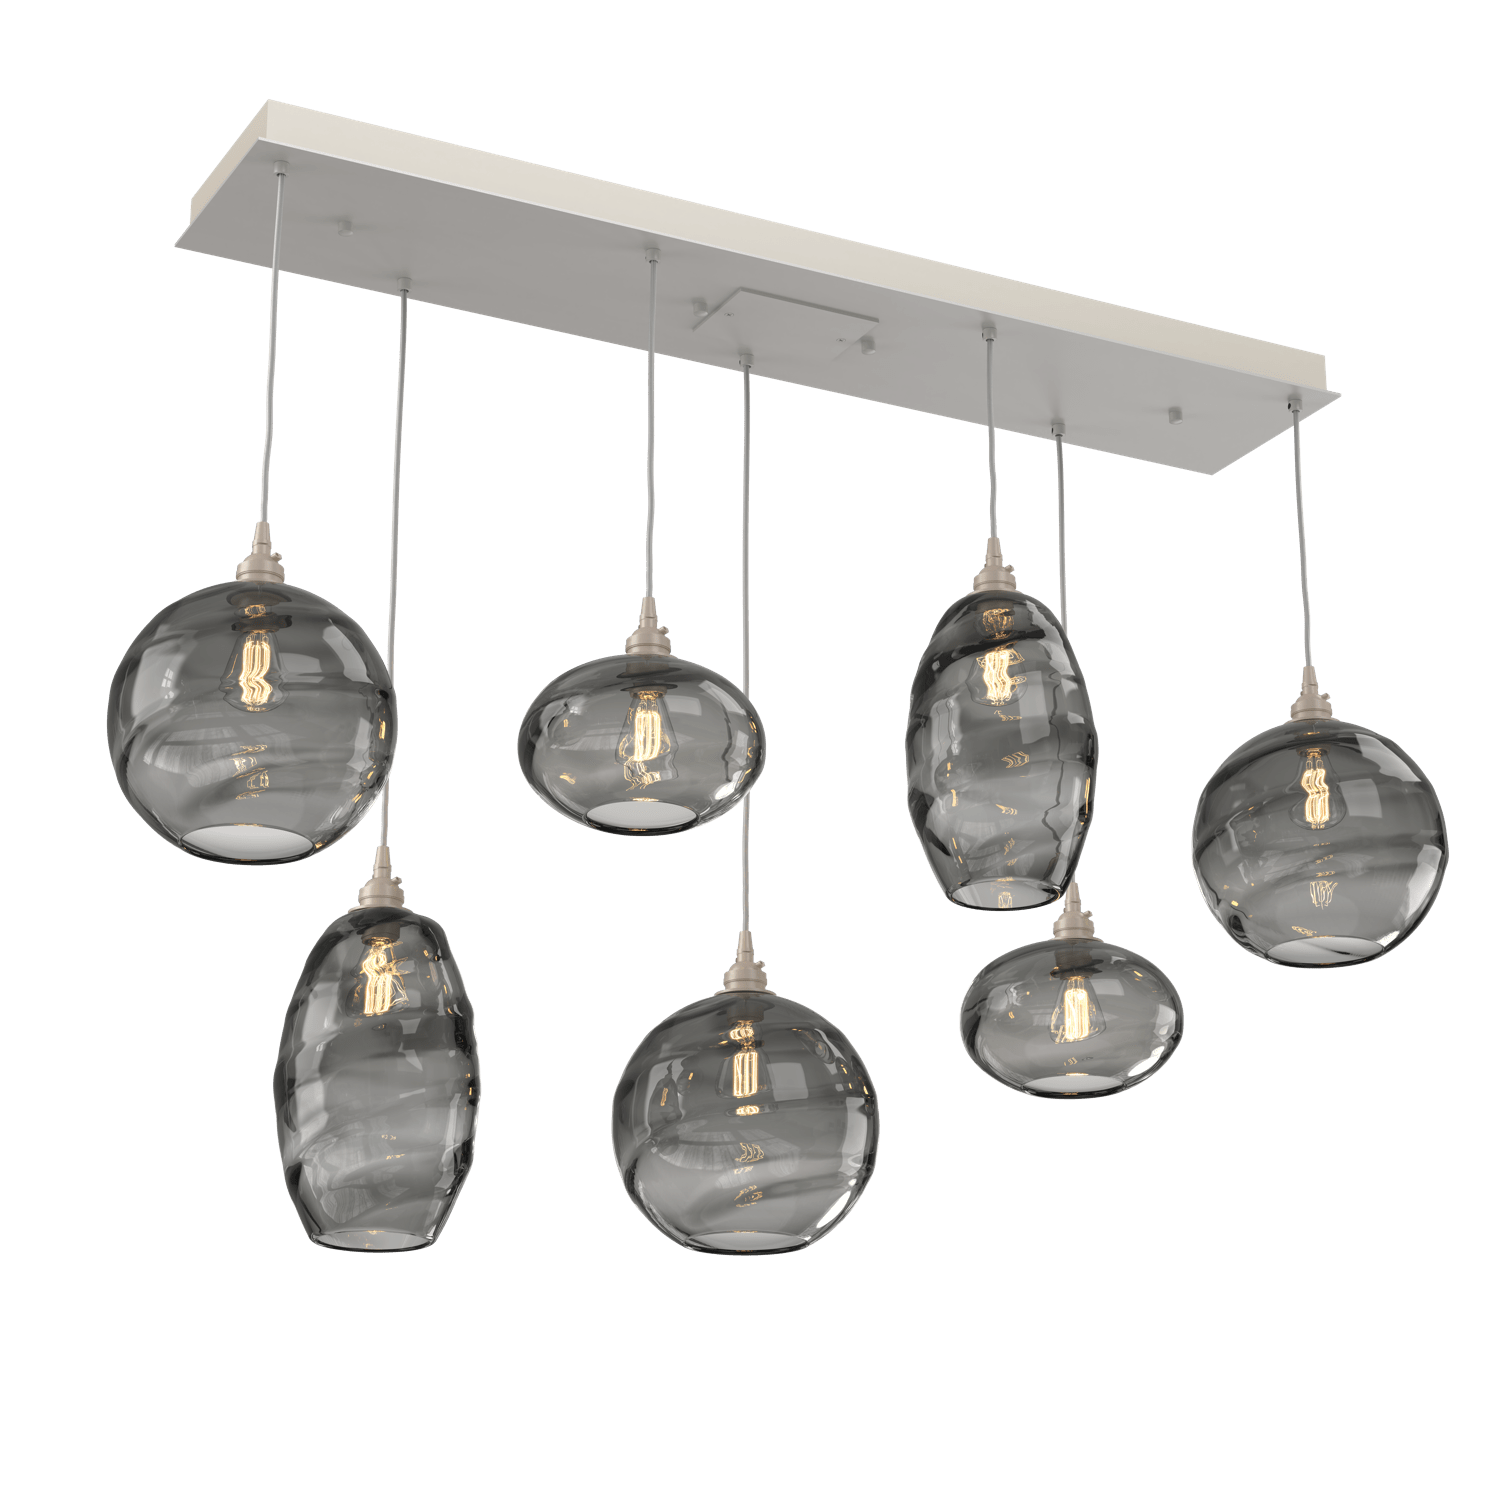 PLB0048-07-BS-OS-Hammerton-Studio-Optic-Blown-Glass-Misto-7-light-linear-pendant-chandelier-with-metallic-beige-silver-finish-and-optic-smoke-blown-glass-shades-and-incandescent-lamping